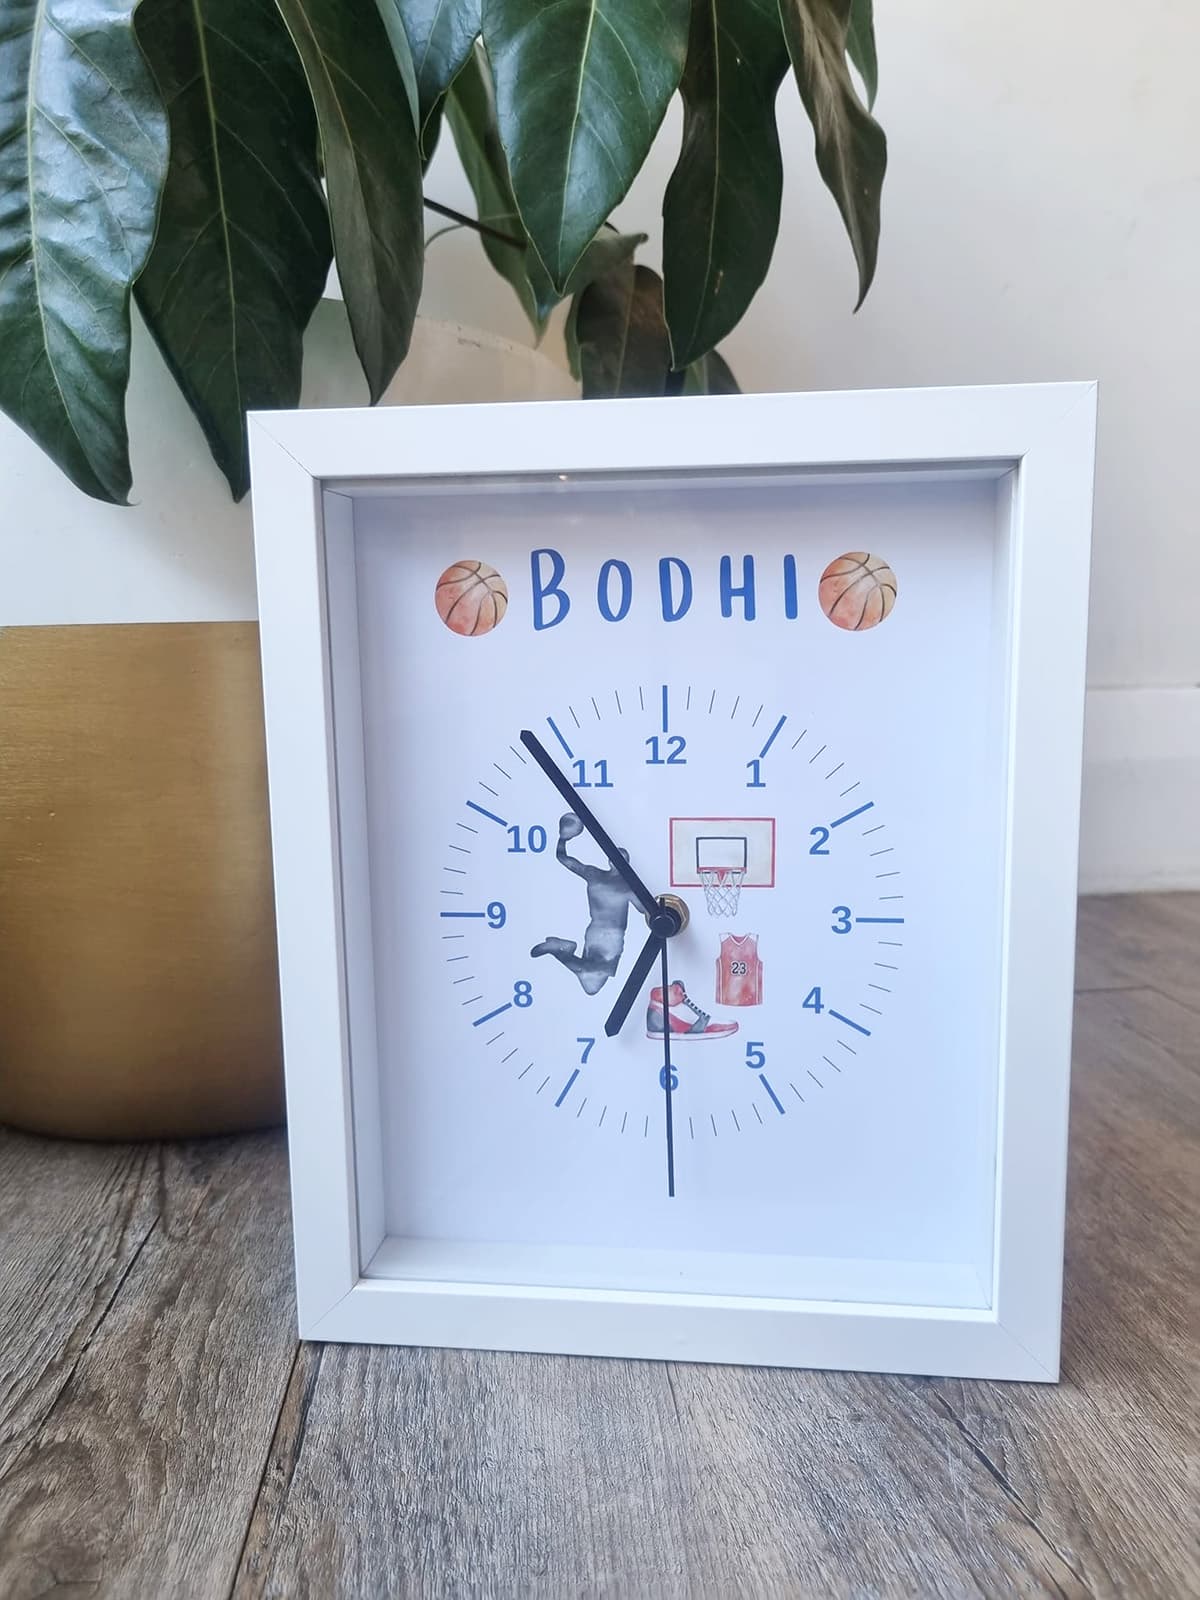 Clock sitting on table with an image of basketball players within it